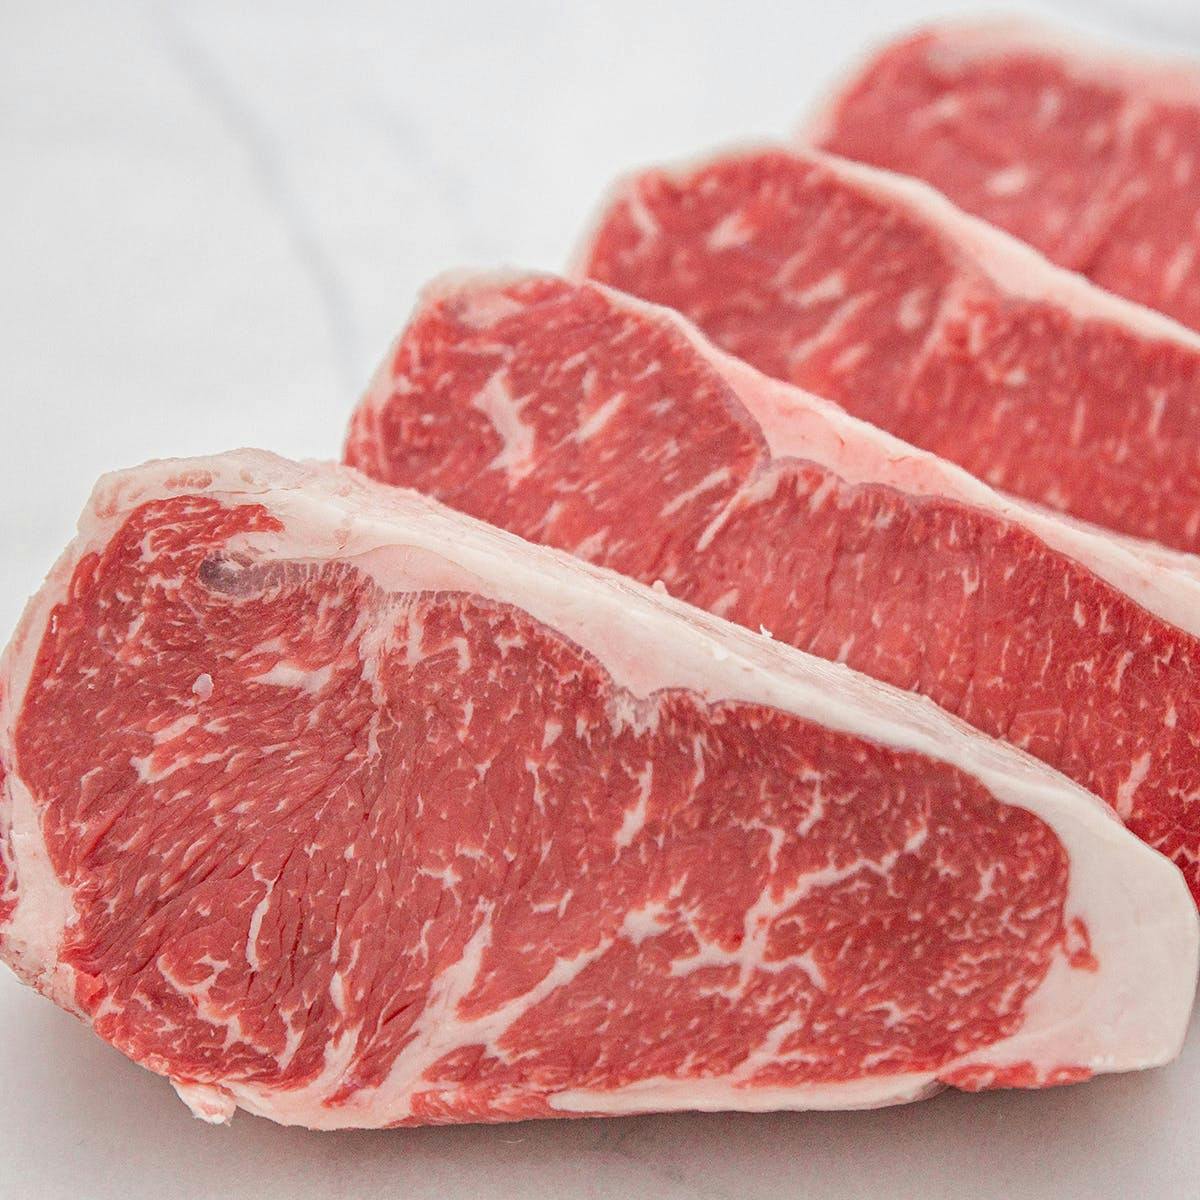 Strips and Filets 4-Steak Gift Pack